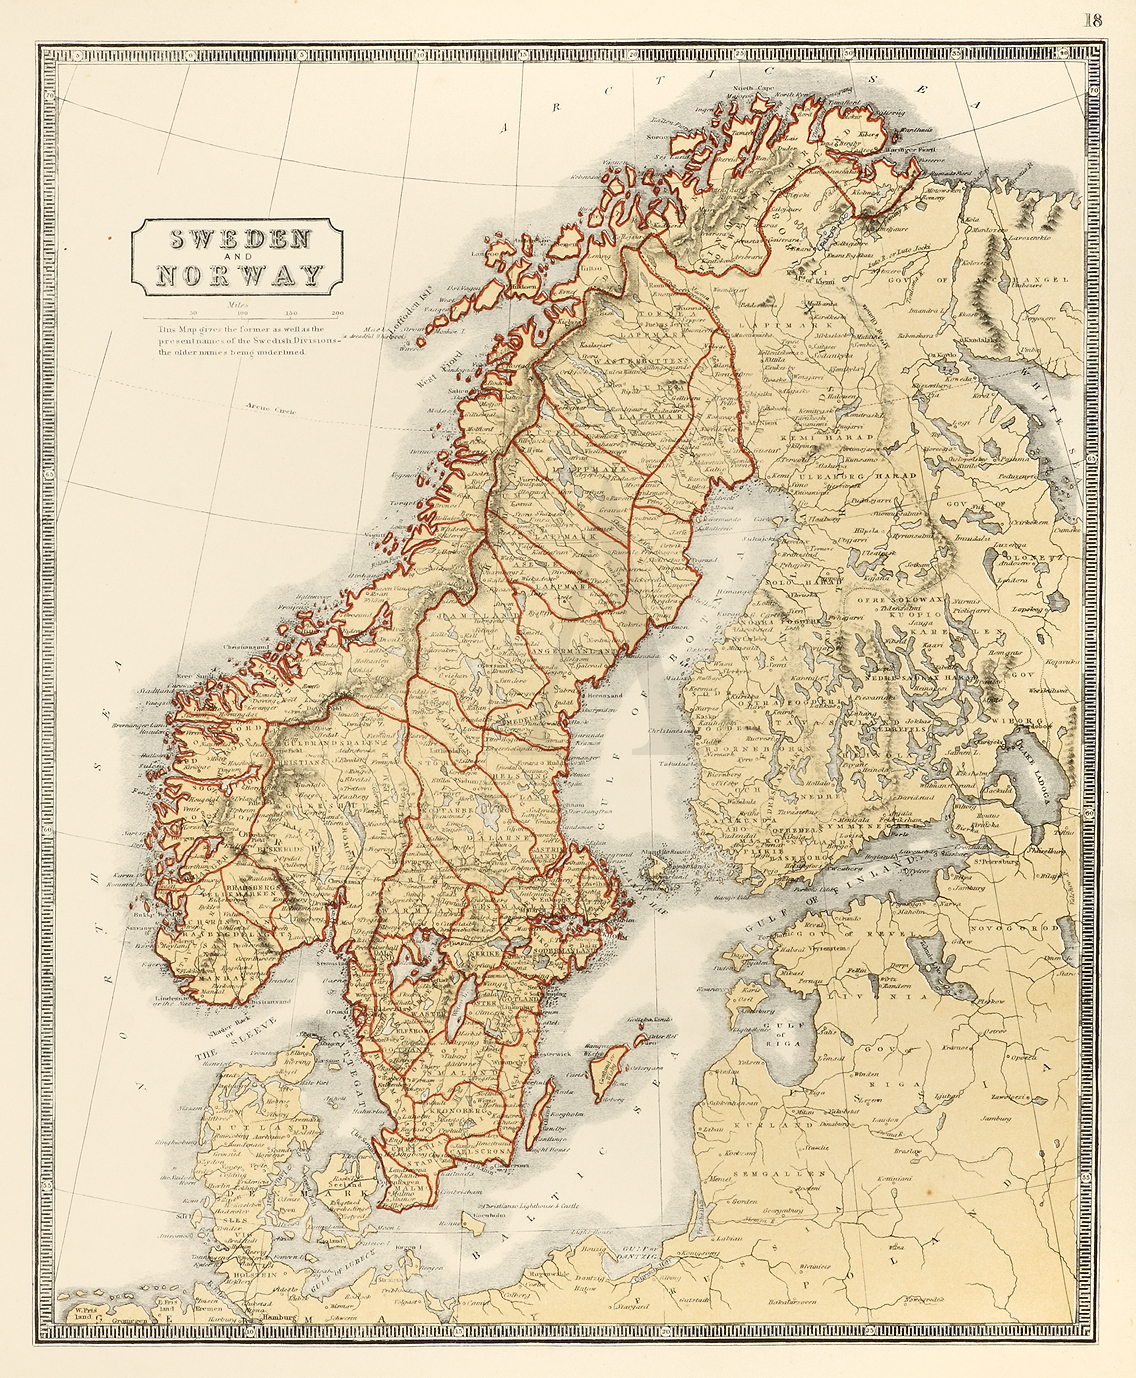 Sweden and Norway - Antique Print from 1863